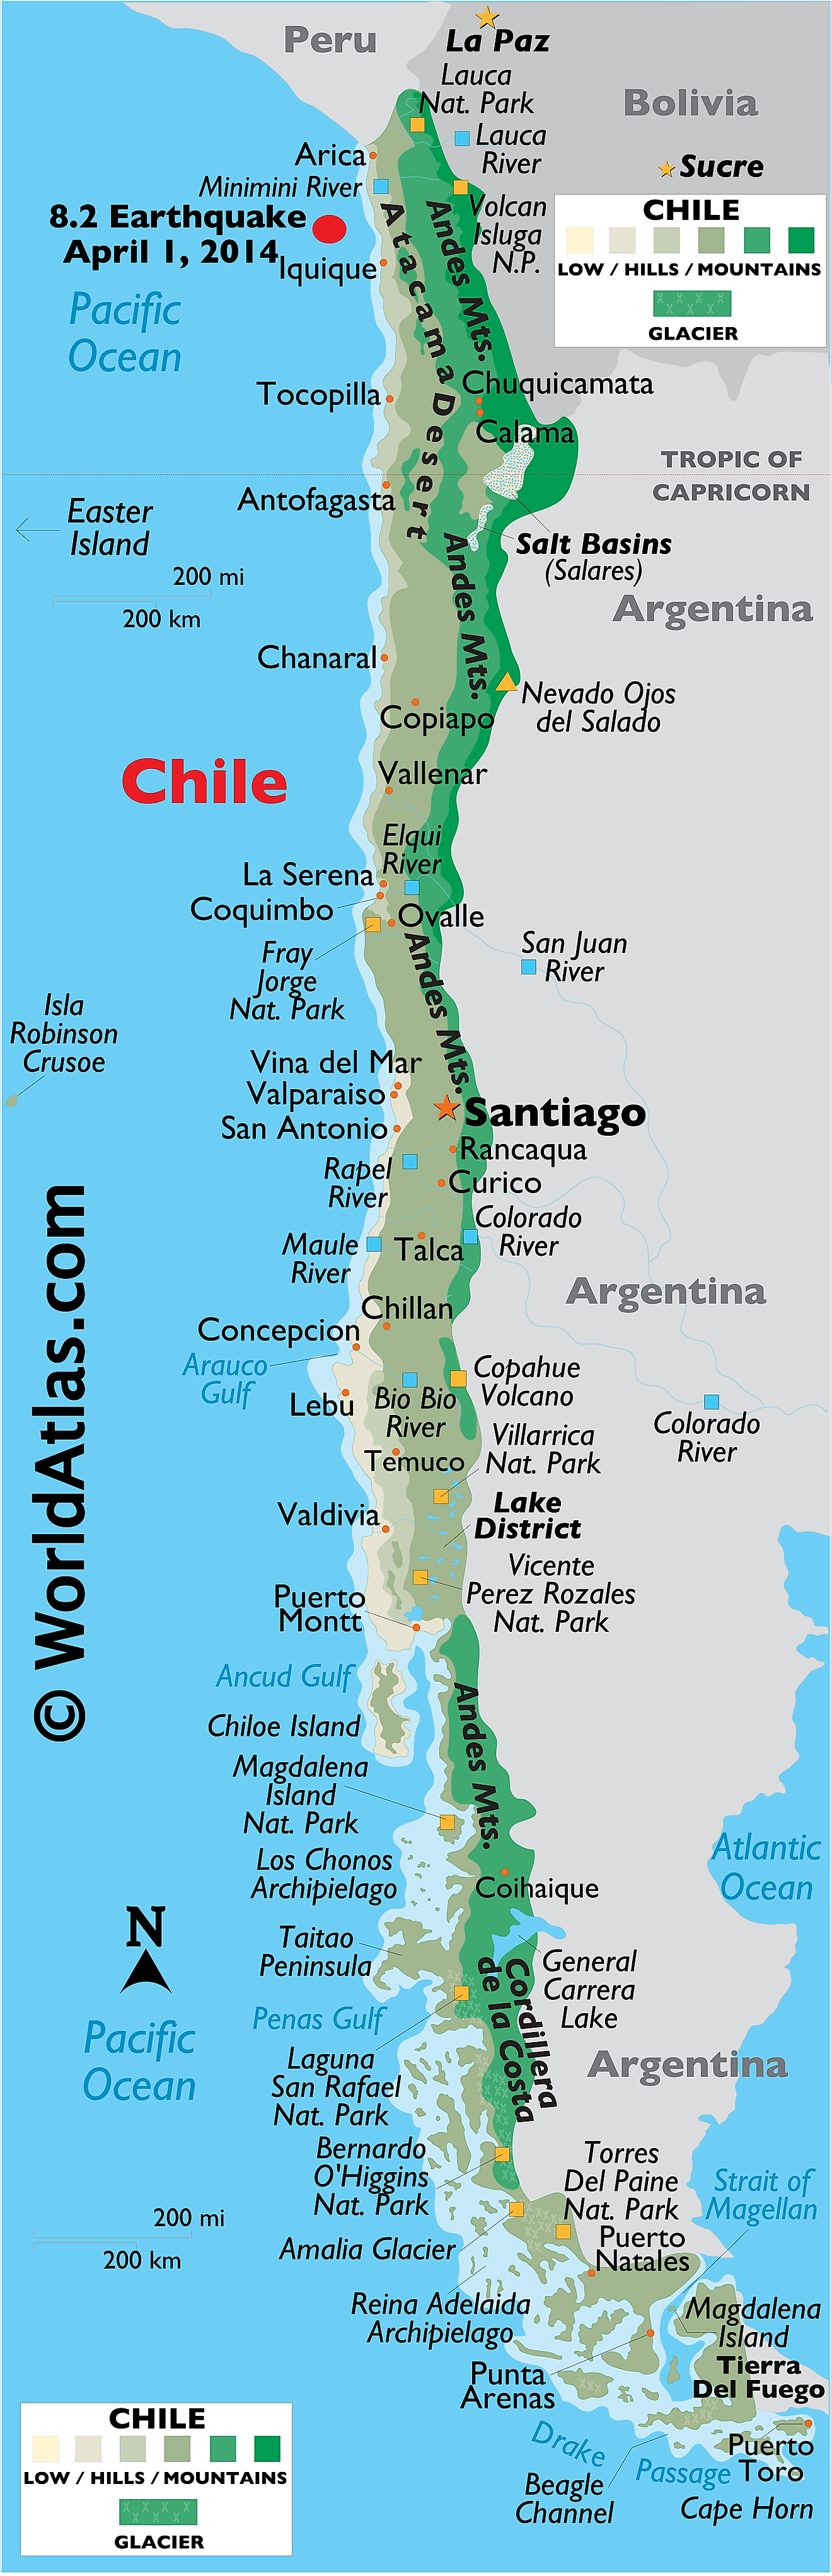 Chile Maps and Information – World Atlas